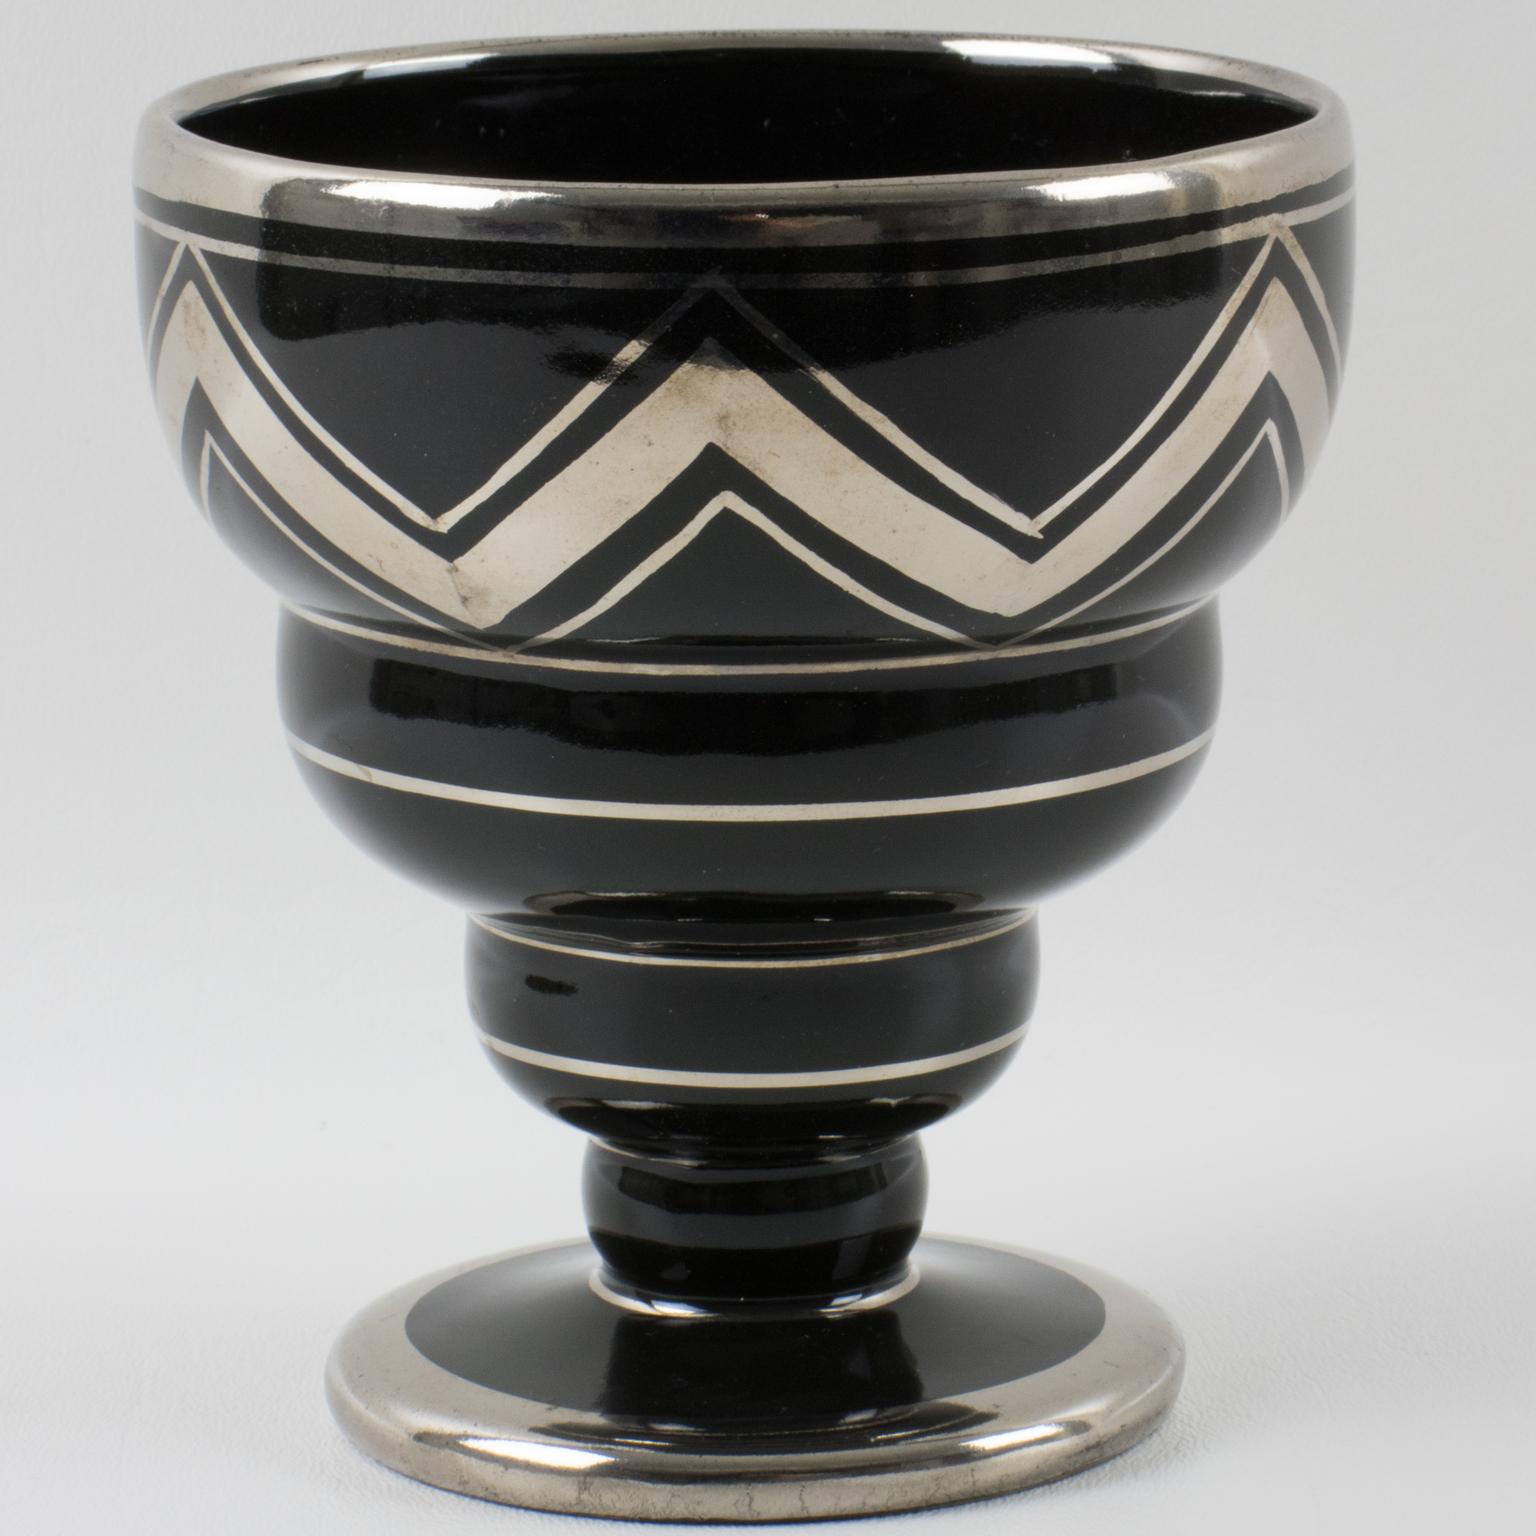 Mid-20th Century Art Deco Silver Overlay and Black Ceramic Vase by Ceram France, 1930s